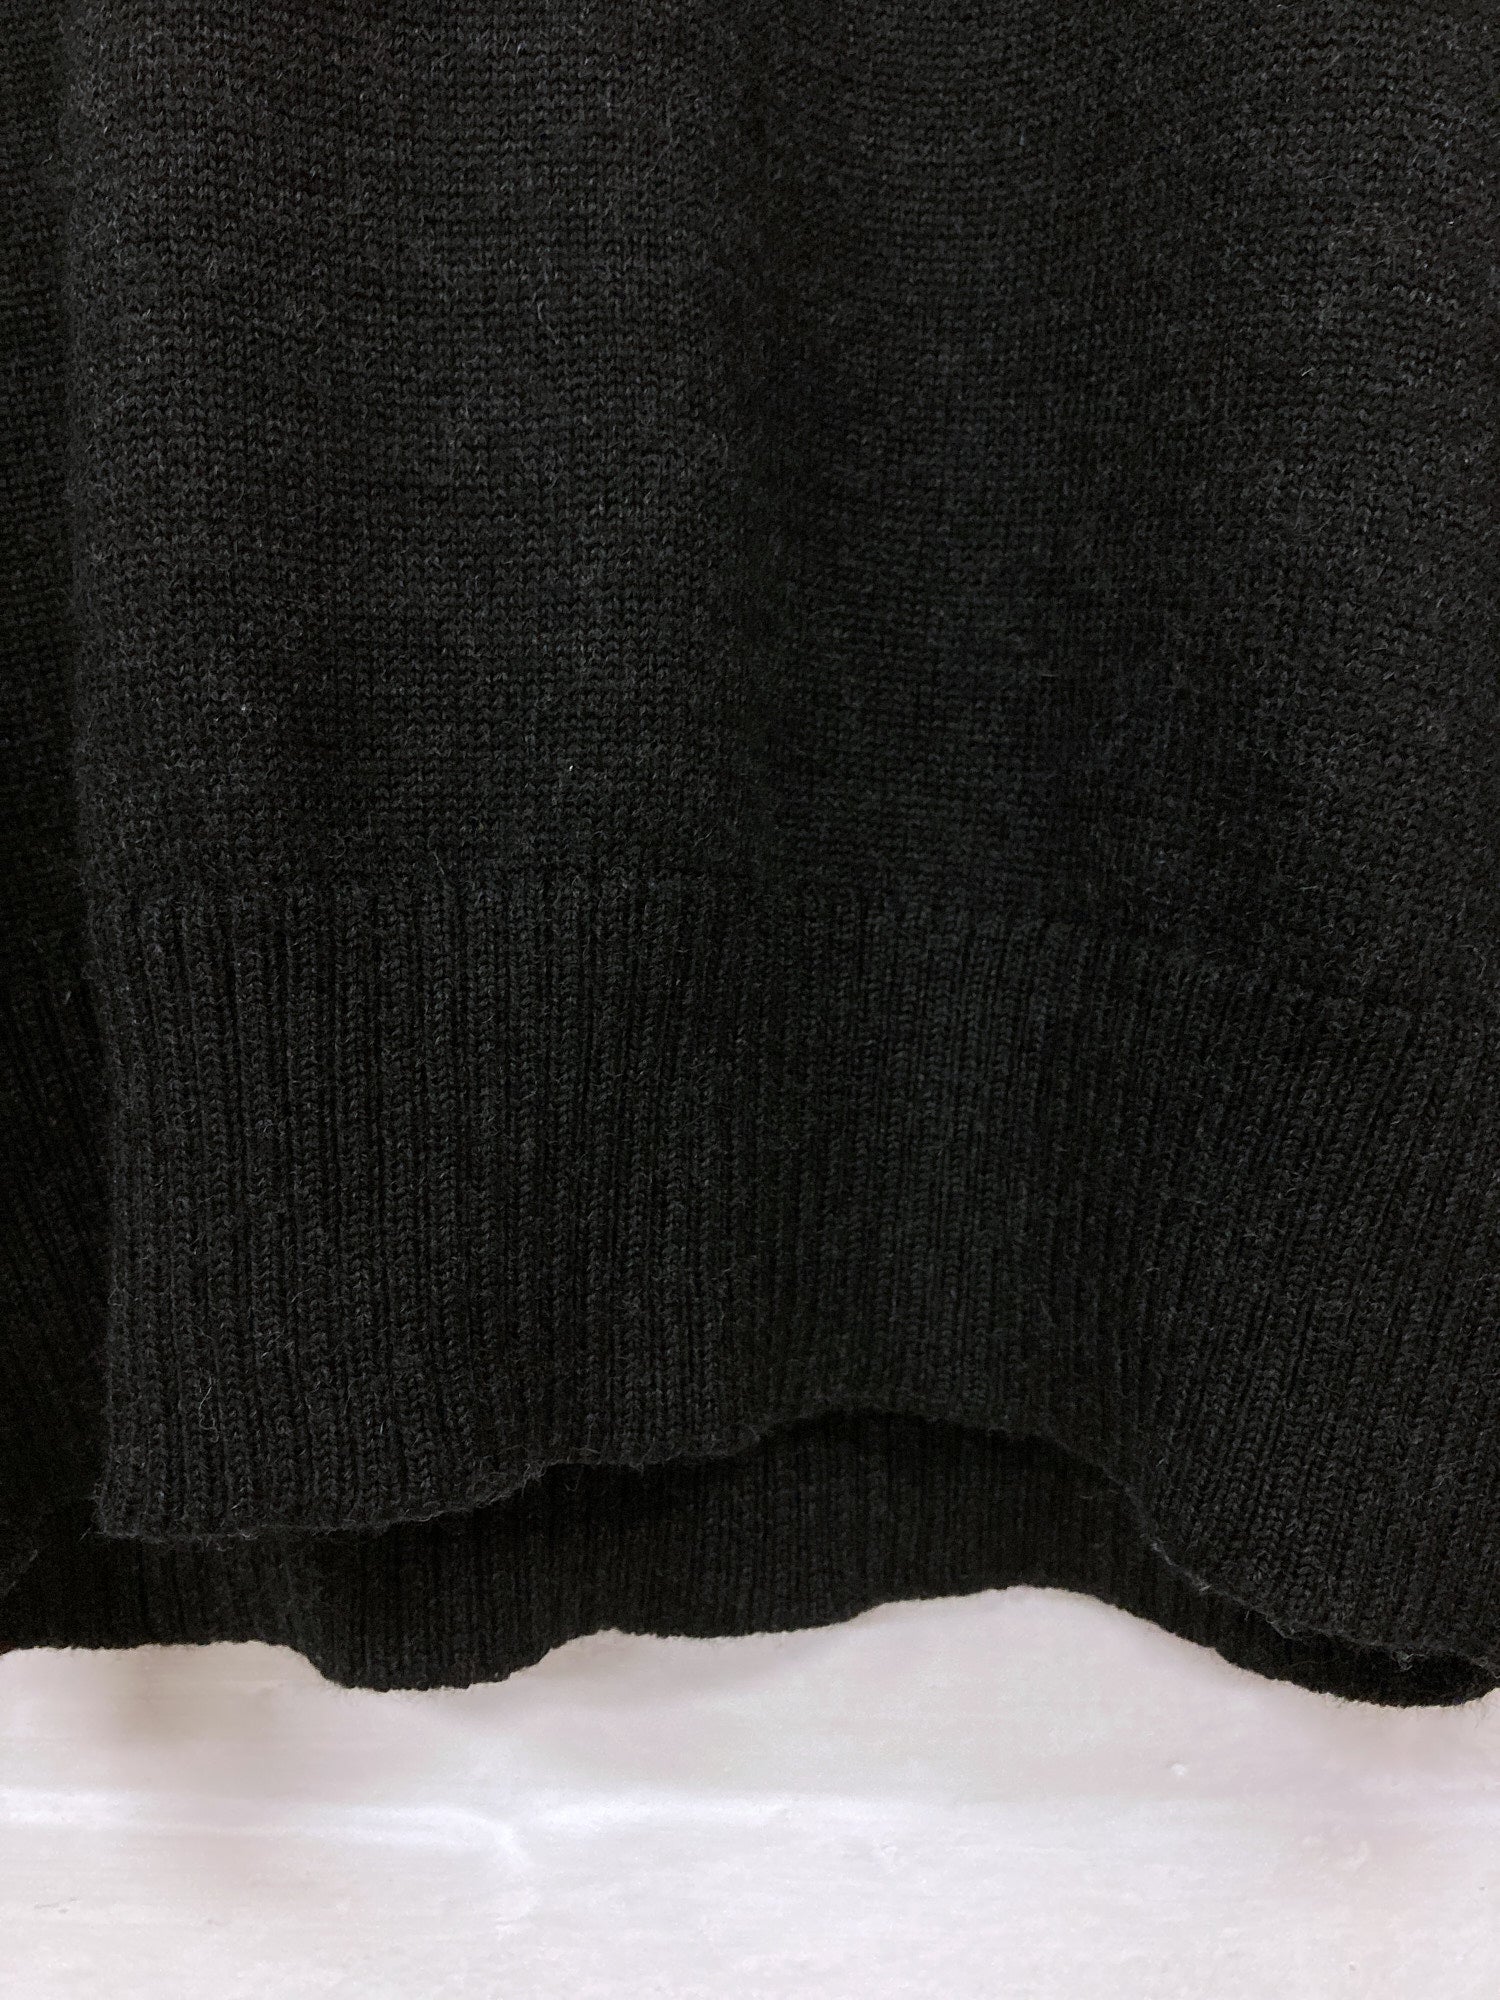 Dirk Schonberger charcoal wool turtleneck sweater with contrast sleeve - M S